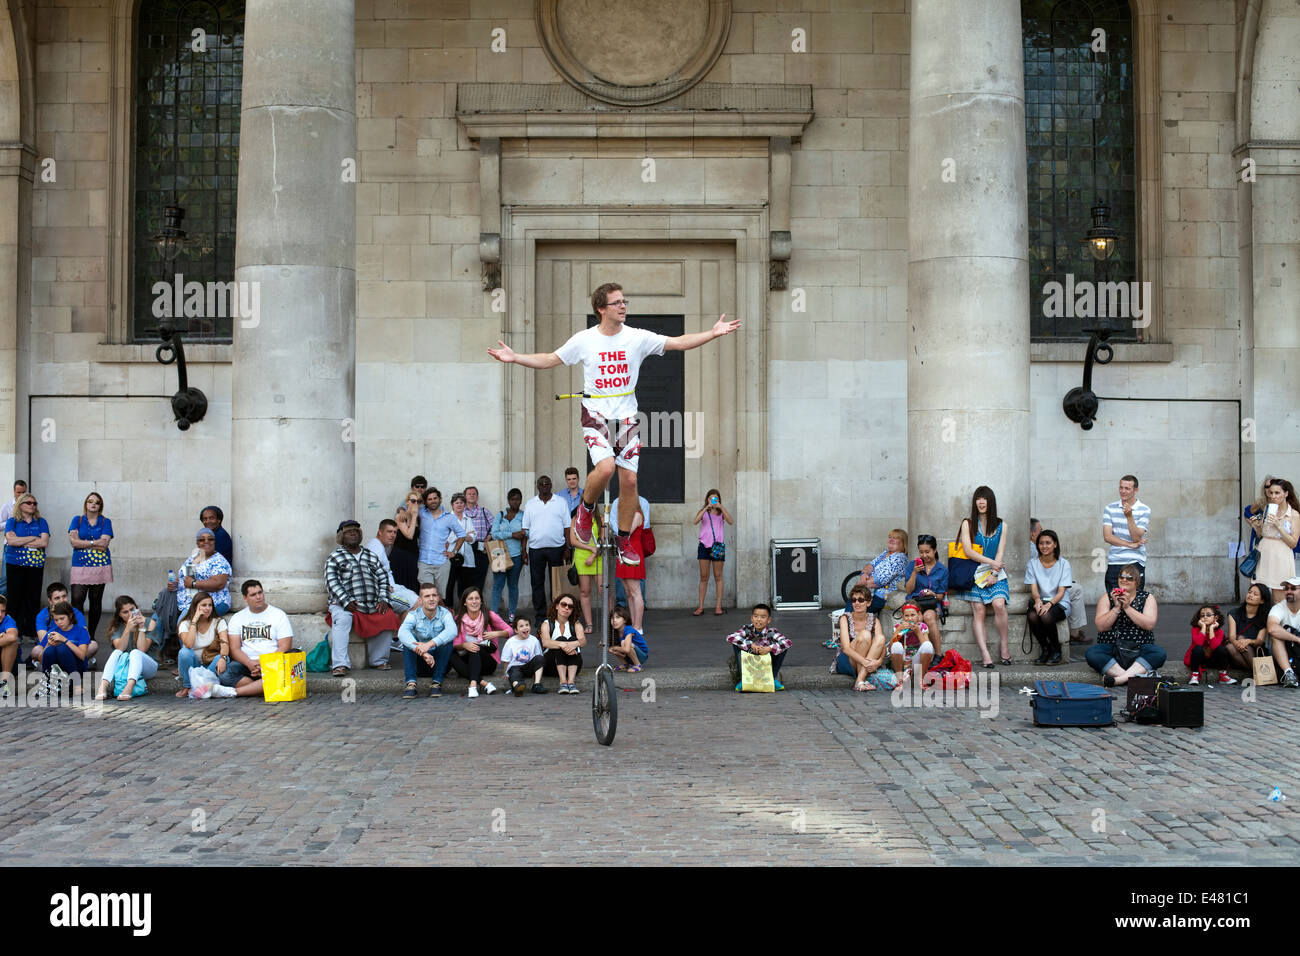 A street performer on a unicycle in front of St Paul's Church (commonly known as the Actor' Church) Covent Garden Market Stock Photo